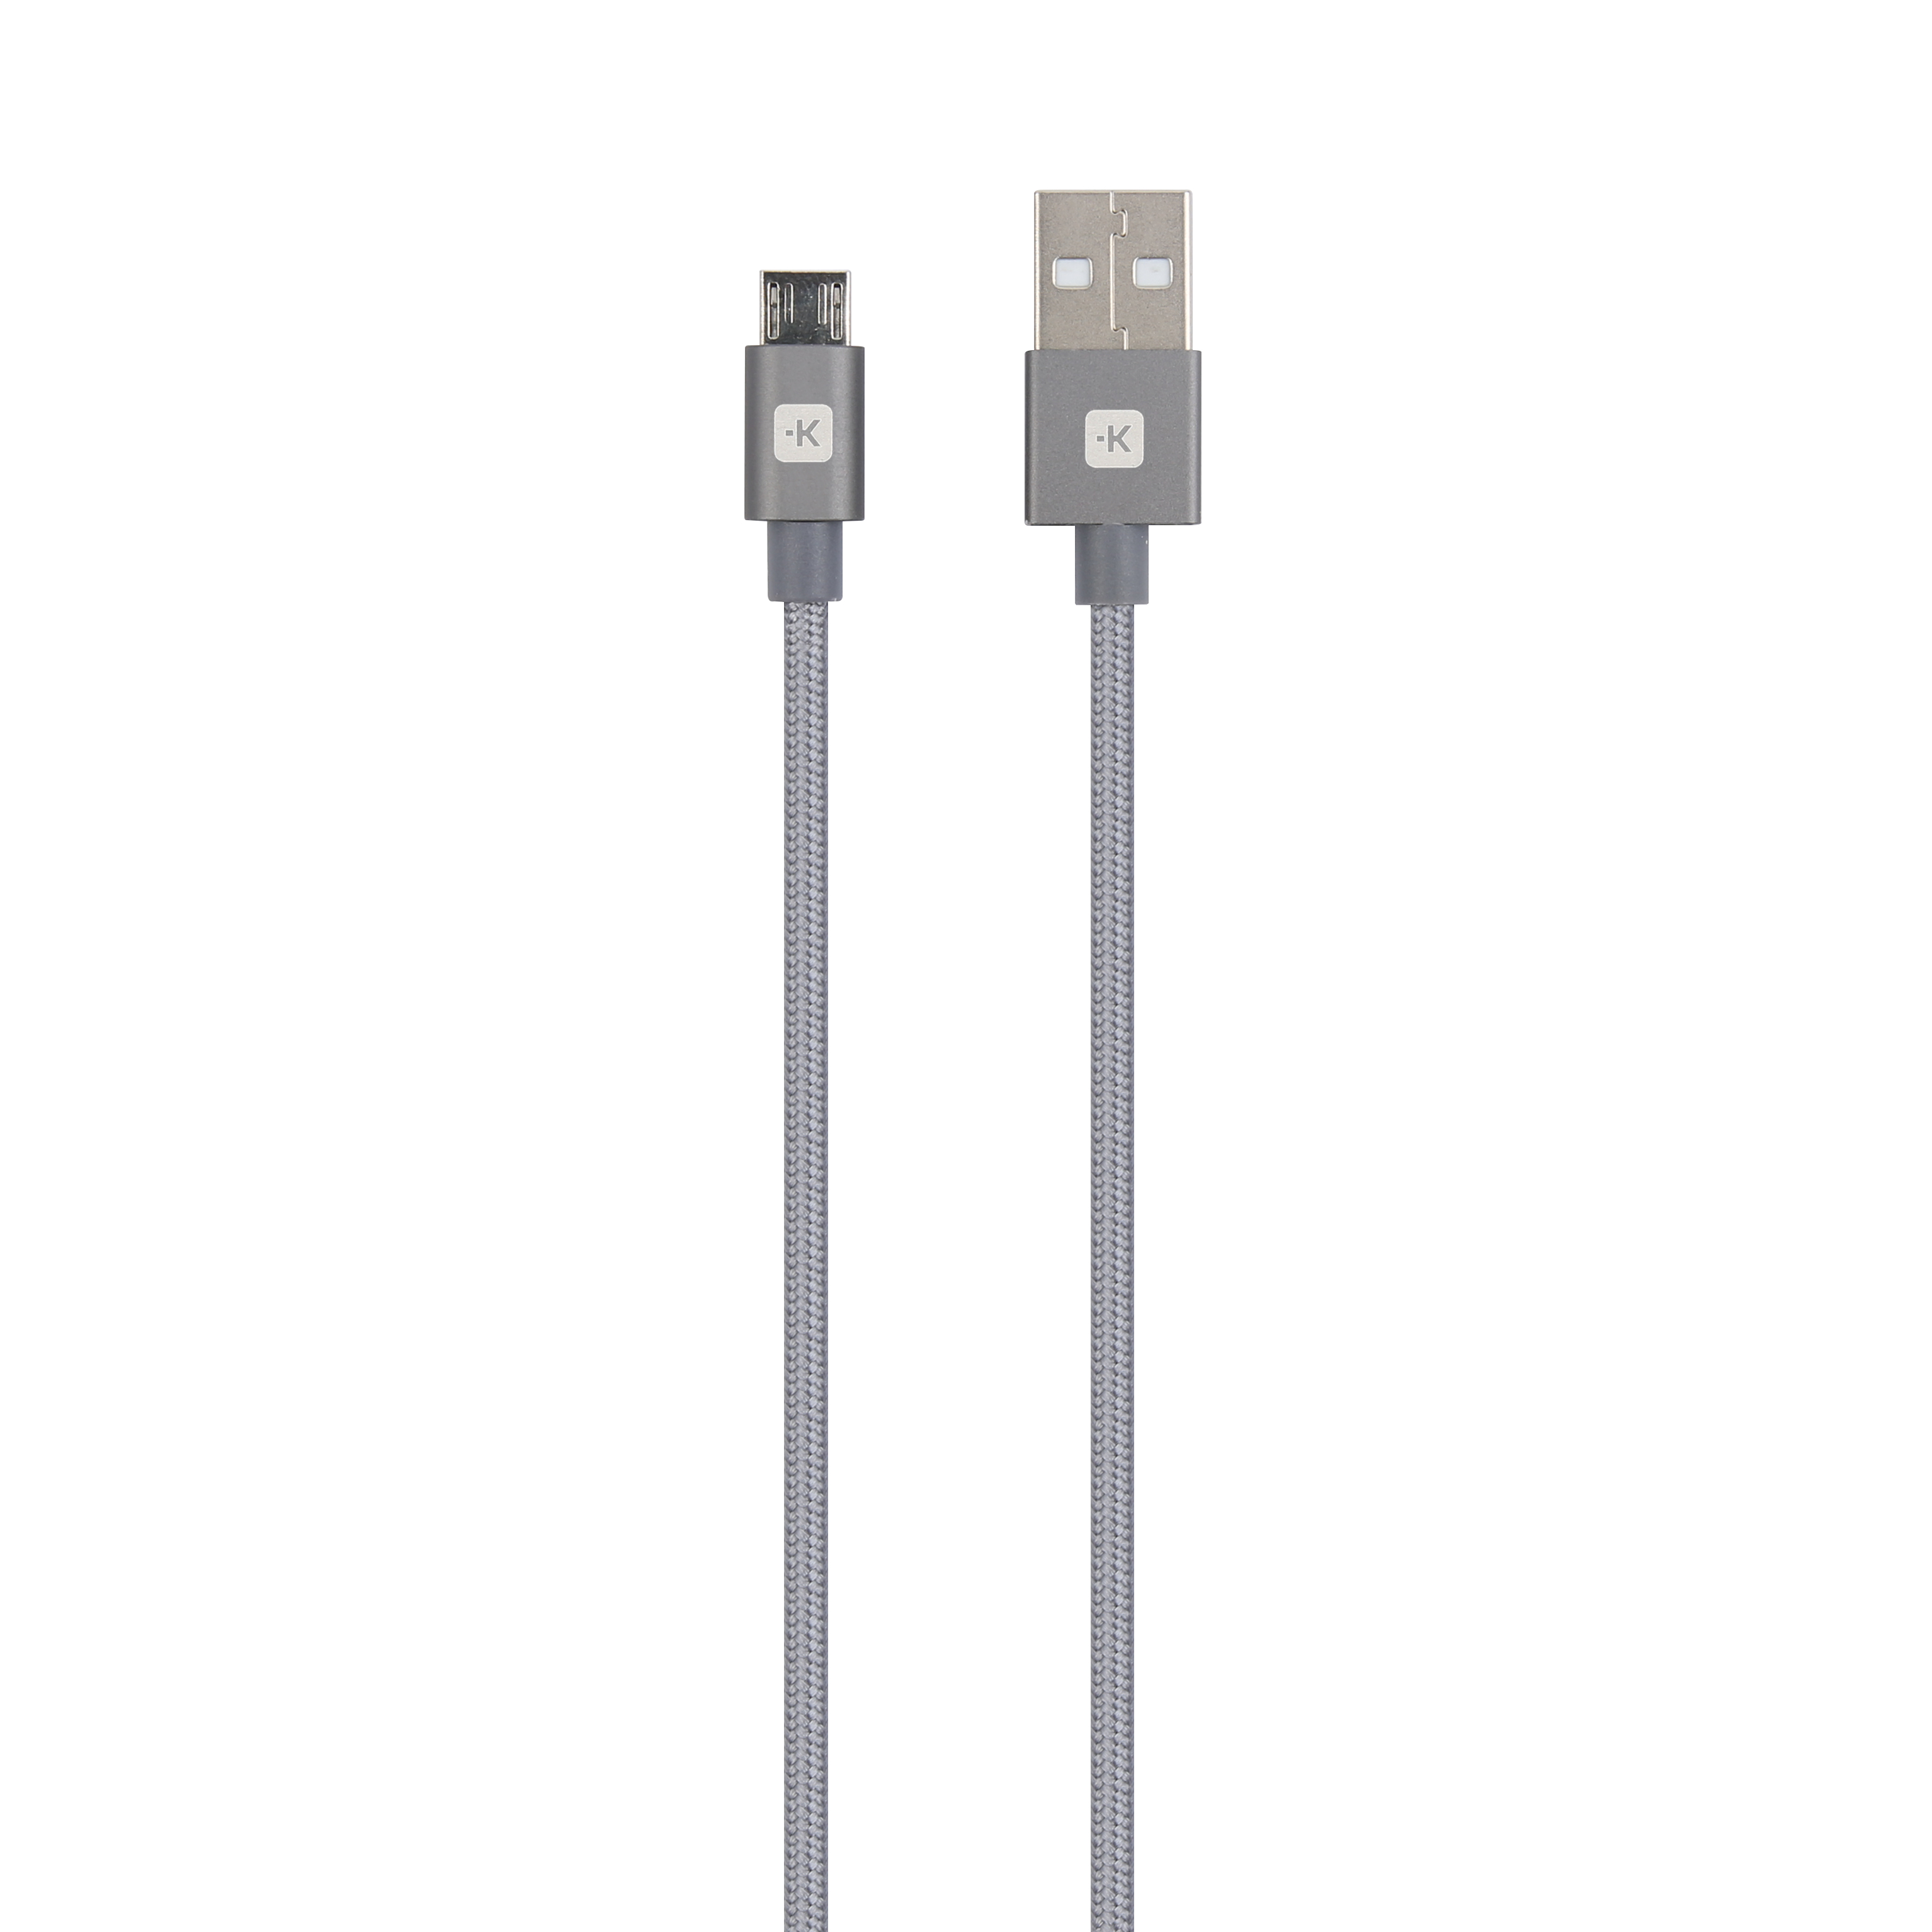 SKROSS Micro USB Cable SKCA0010A-M120CN 1.2m Space Grey 1.2m Space Grey